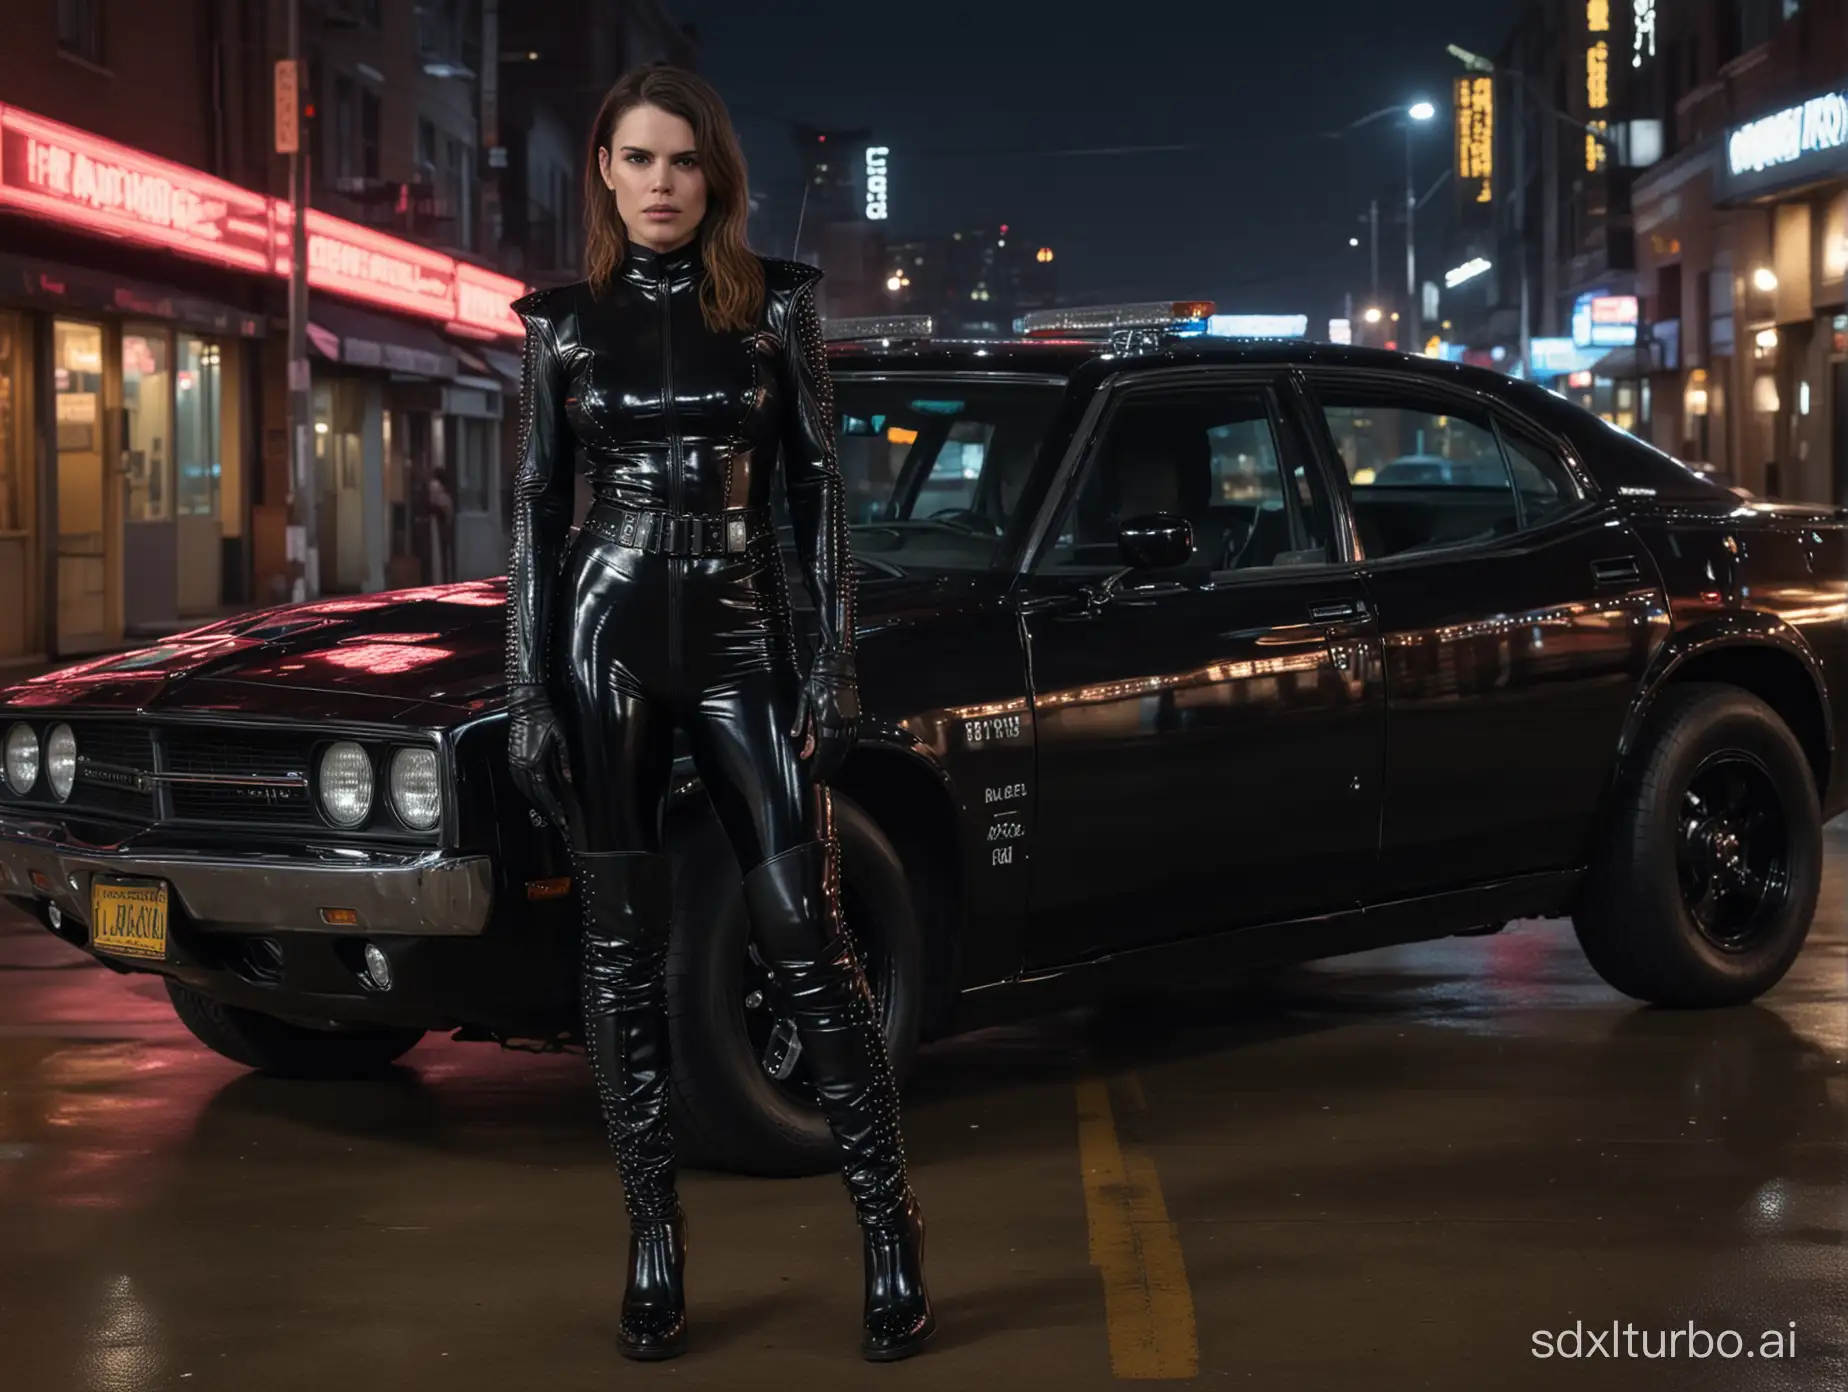 detailled hd photo , full-length framing , cyberpunk police woman Clea Duvall standing , wearing black low-cut shinny pvc catsuit , wearing long shiny pvc gloves , wearing shinny pvc thigh high boots , spikes and studs , in cyberpunk city at night with dodge charger police car , inlighted by neon